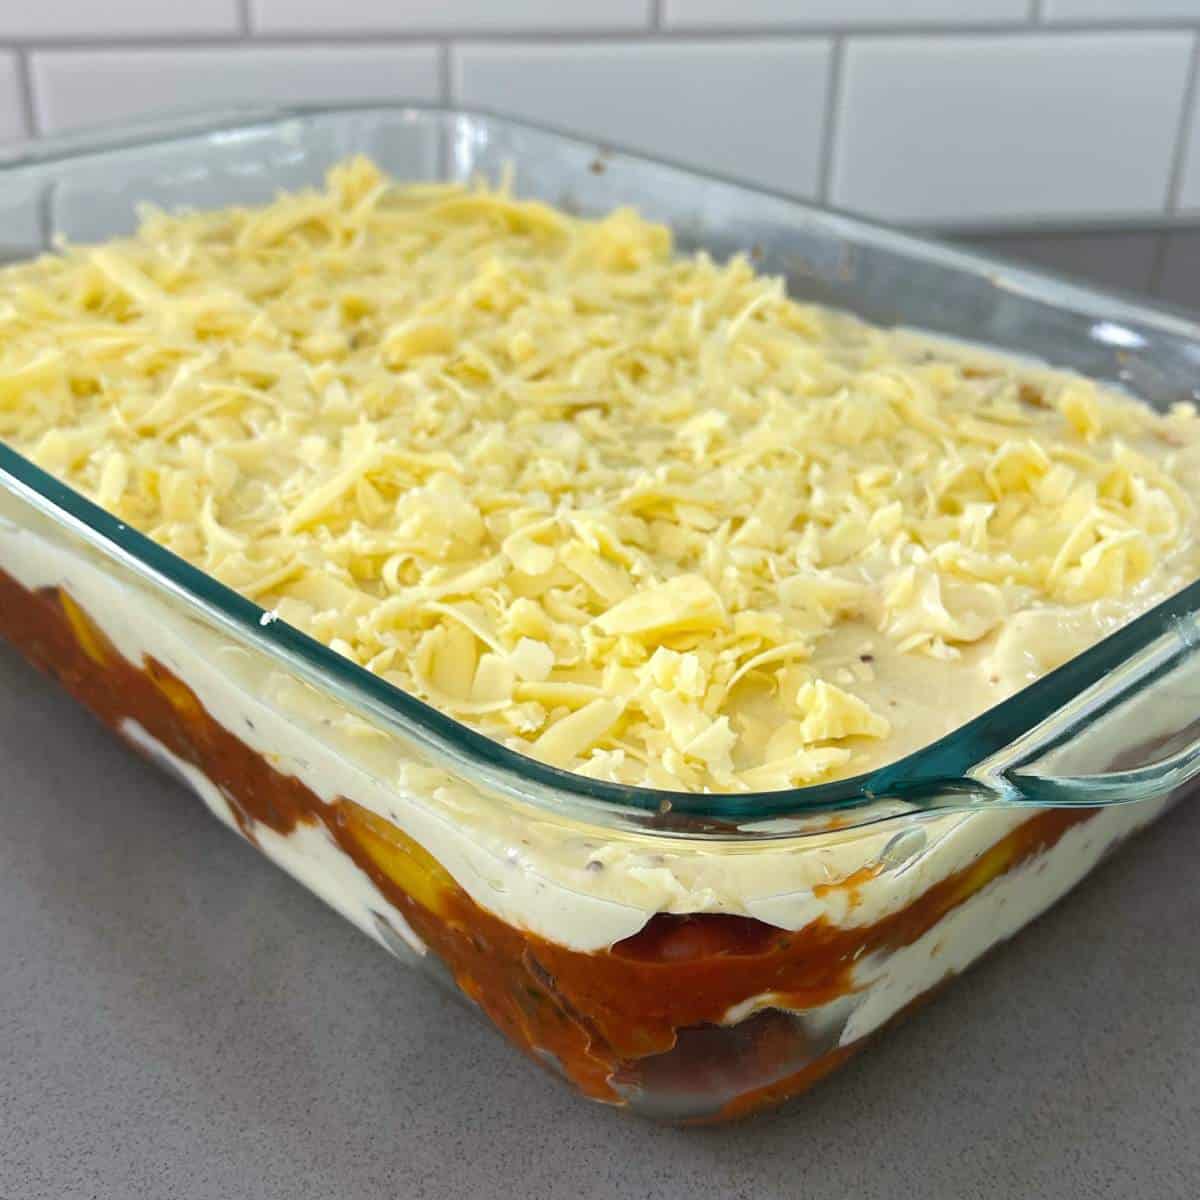 Uncooked vegetarian lasagne in a glass dish showing the different layers of the lasagne